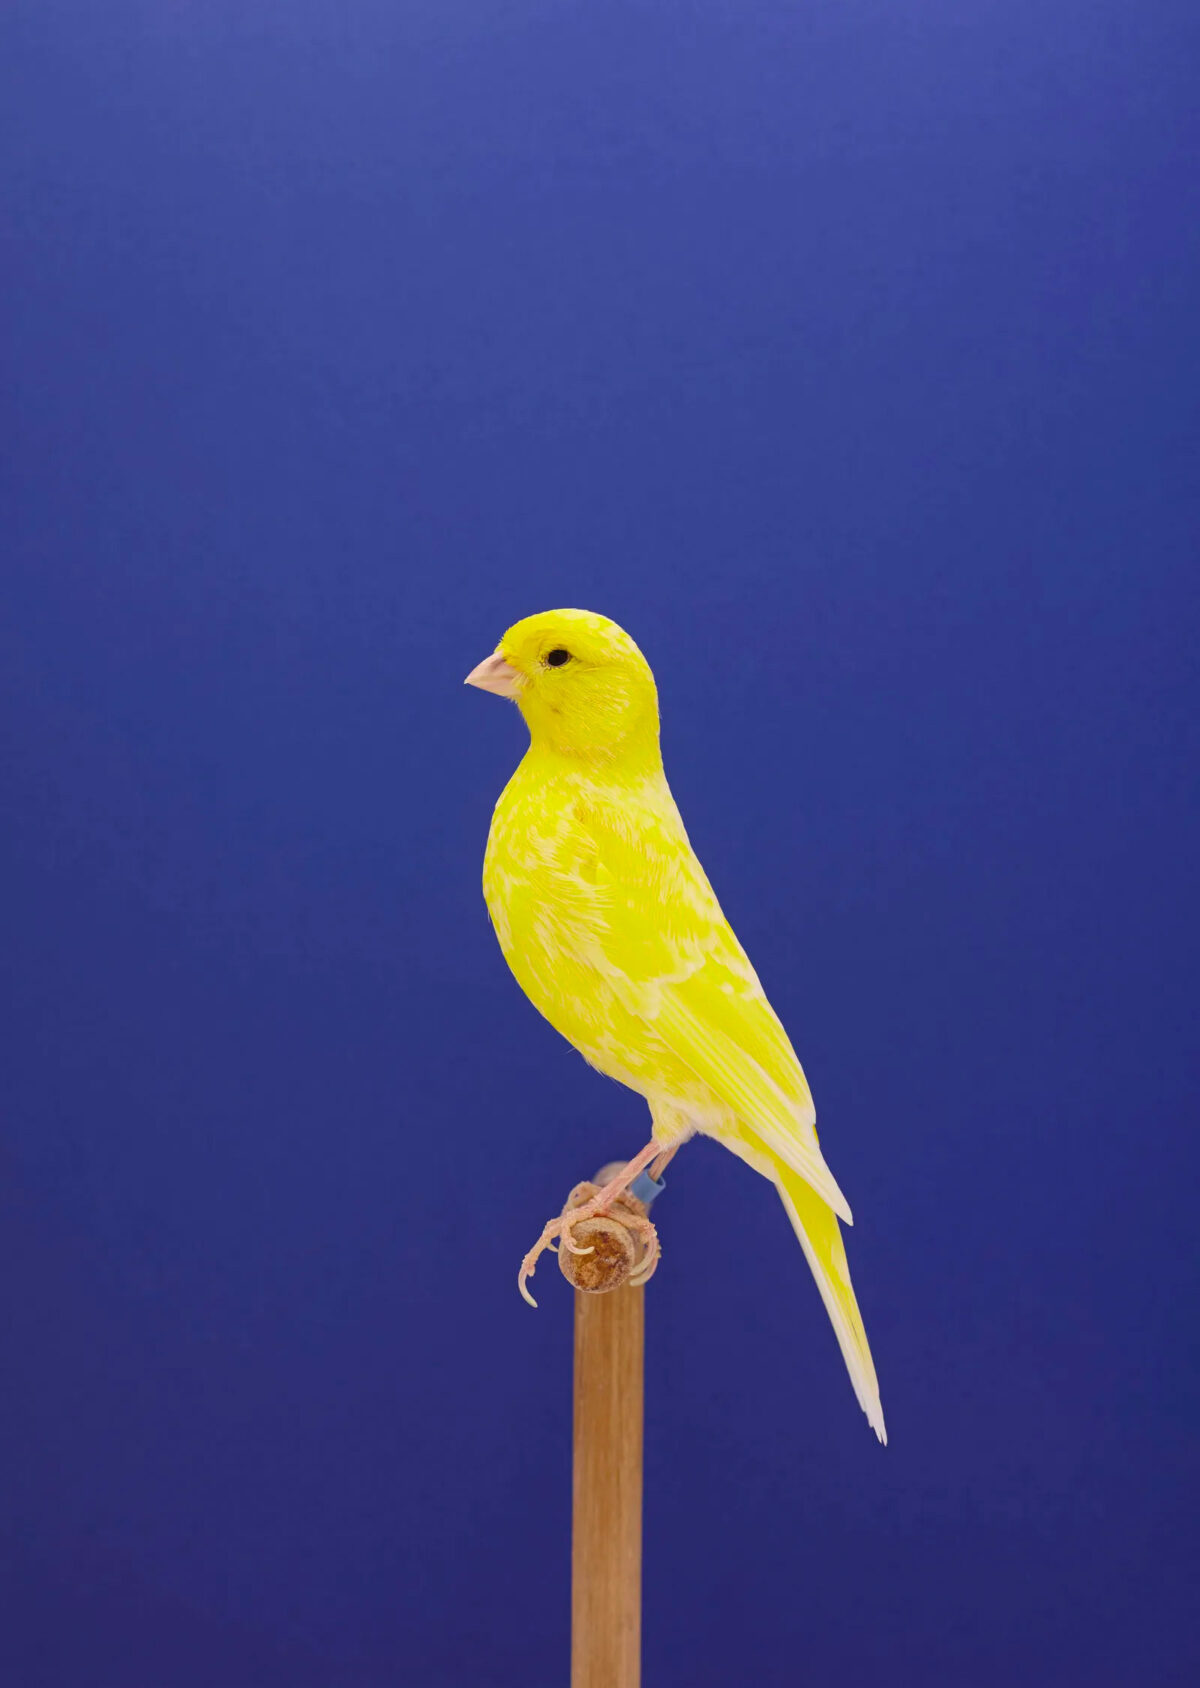 An Incomplete Dictionary Of Show Birds A Minimalist Bird Photography Series By Luke Stephenson (5)